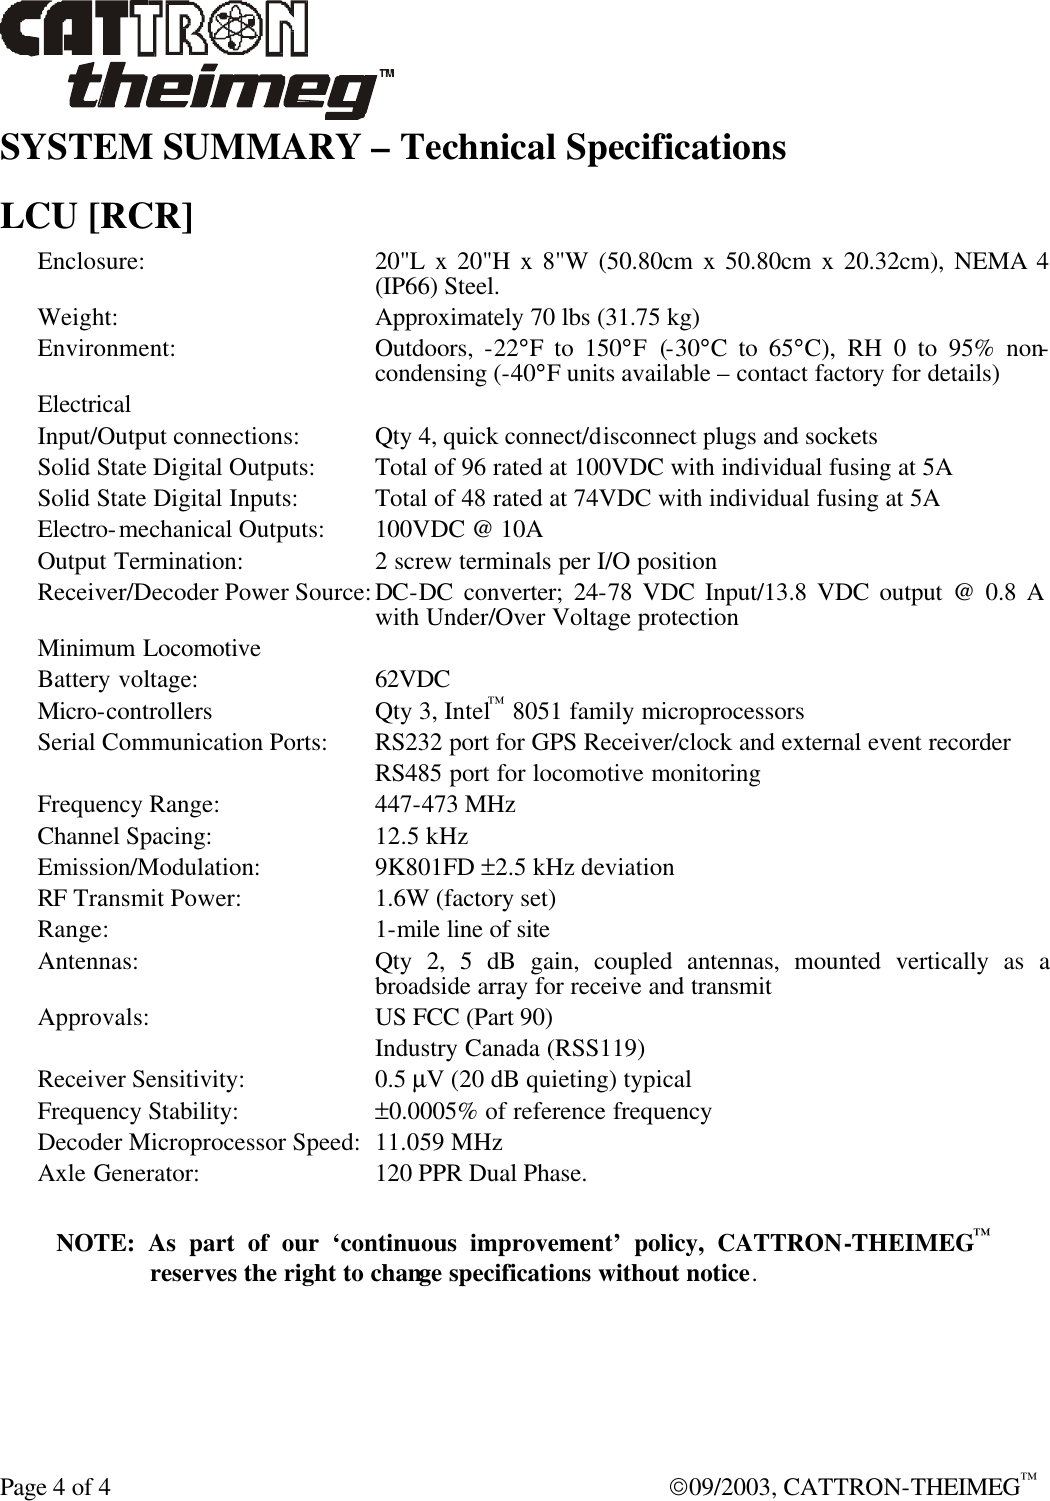  Page 4 of 4  09/2003, CATTRON-THEIMEG™ SYSTEM SUMMARY – Technical Specifications  LCU [RCR] Enclosure: 20&quot;L x 20&quot;H x 8&quot;W (50.80cm x 50.80cm x 20.32cm), NEMA 4 (IP66) Steel.  Weight: Approximately 70 lbs (31.75 kg) Environment: Outdoors,  -22°F to 150°F (-30°C to 65°C), RH 0 to 95% non-condensing (-40°F units available – contact factory for details) Electrical  Input/Output connections: Qty 4, quick connect/disconnect plugs and sockets Solid State Digital Outputs: Total of 96 rated at 100VDC with individual fusing at 5A Solid State Digital Inputs: Total of 48 rated at 74VDC with individual fusing at 5A Electro-mechanical Outputs:  100VDC @ 10A Output Termination: 2 screw terminals per I/O position Receiver/Decoder Power Source: DC-DC converter; 24-78 VDC Input/13.8 VDC output @ 0.8 A with Under/Over Voltage protection Minimum Locomotive Battery voltage: 62VDC Micro-controllers Qty 3, Intel™ 8051 family microprocessors Serial Communication Ports: RS232 port for GPS Receiver/clock and external event recorder  RS485 port for locomotive monitoring Frequency Range:  447-473 MHz Channel Spacing: 12.5 kHz Emission/Modulation: 9K801FD ±2.5 kHz deviation RF Transmit Power: 1.6W (factory set) Range:   1-mile line of site Antennas: Qty 2, 5 dB gain, coupled antennas, mounted vertically as a broadside array for receive and transmit Approvals: US FCC (Part 90)  Industry Canada (RSS119) Receiver Sensitivity:  0.5 µV (20 dB quieting) typical Frequency Stability: ±0.0005% of reference frequency Decoder Microprocessor Speed: 11.059 MHz Axle Generator: 120 PPR Dual Phase.  NOTE: As part of our ‘continuous improvement’ policy, CATTRON-THEIMEG™ reserves the right to change specifications without notice.   